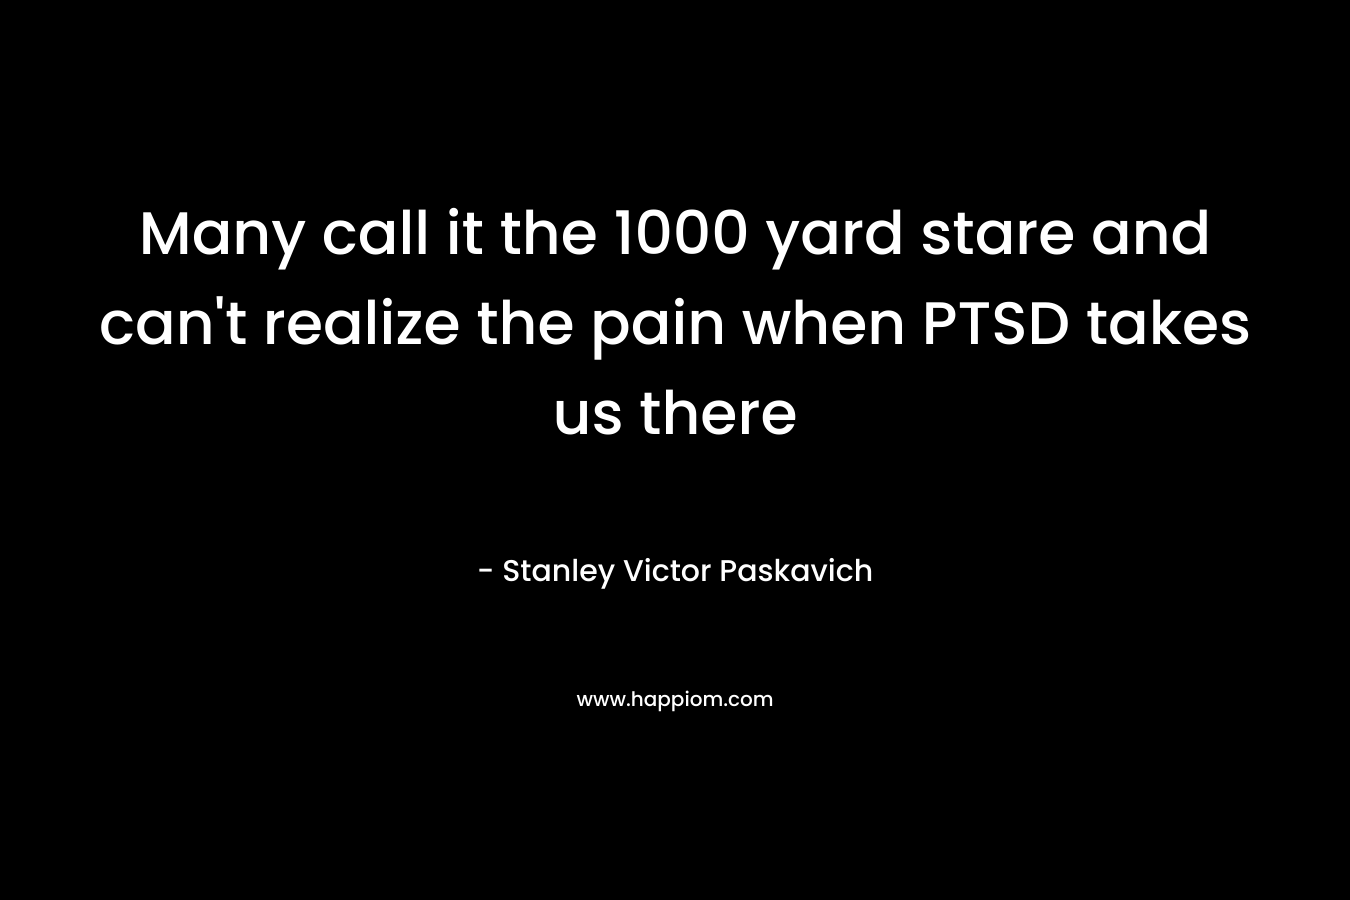 Many call it the 1000 yard stare and can’t realize the pain when PTSD takes us there – Stanley Victor Paskavich